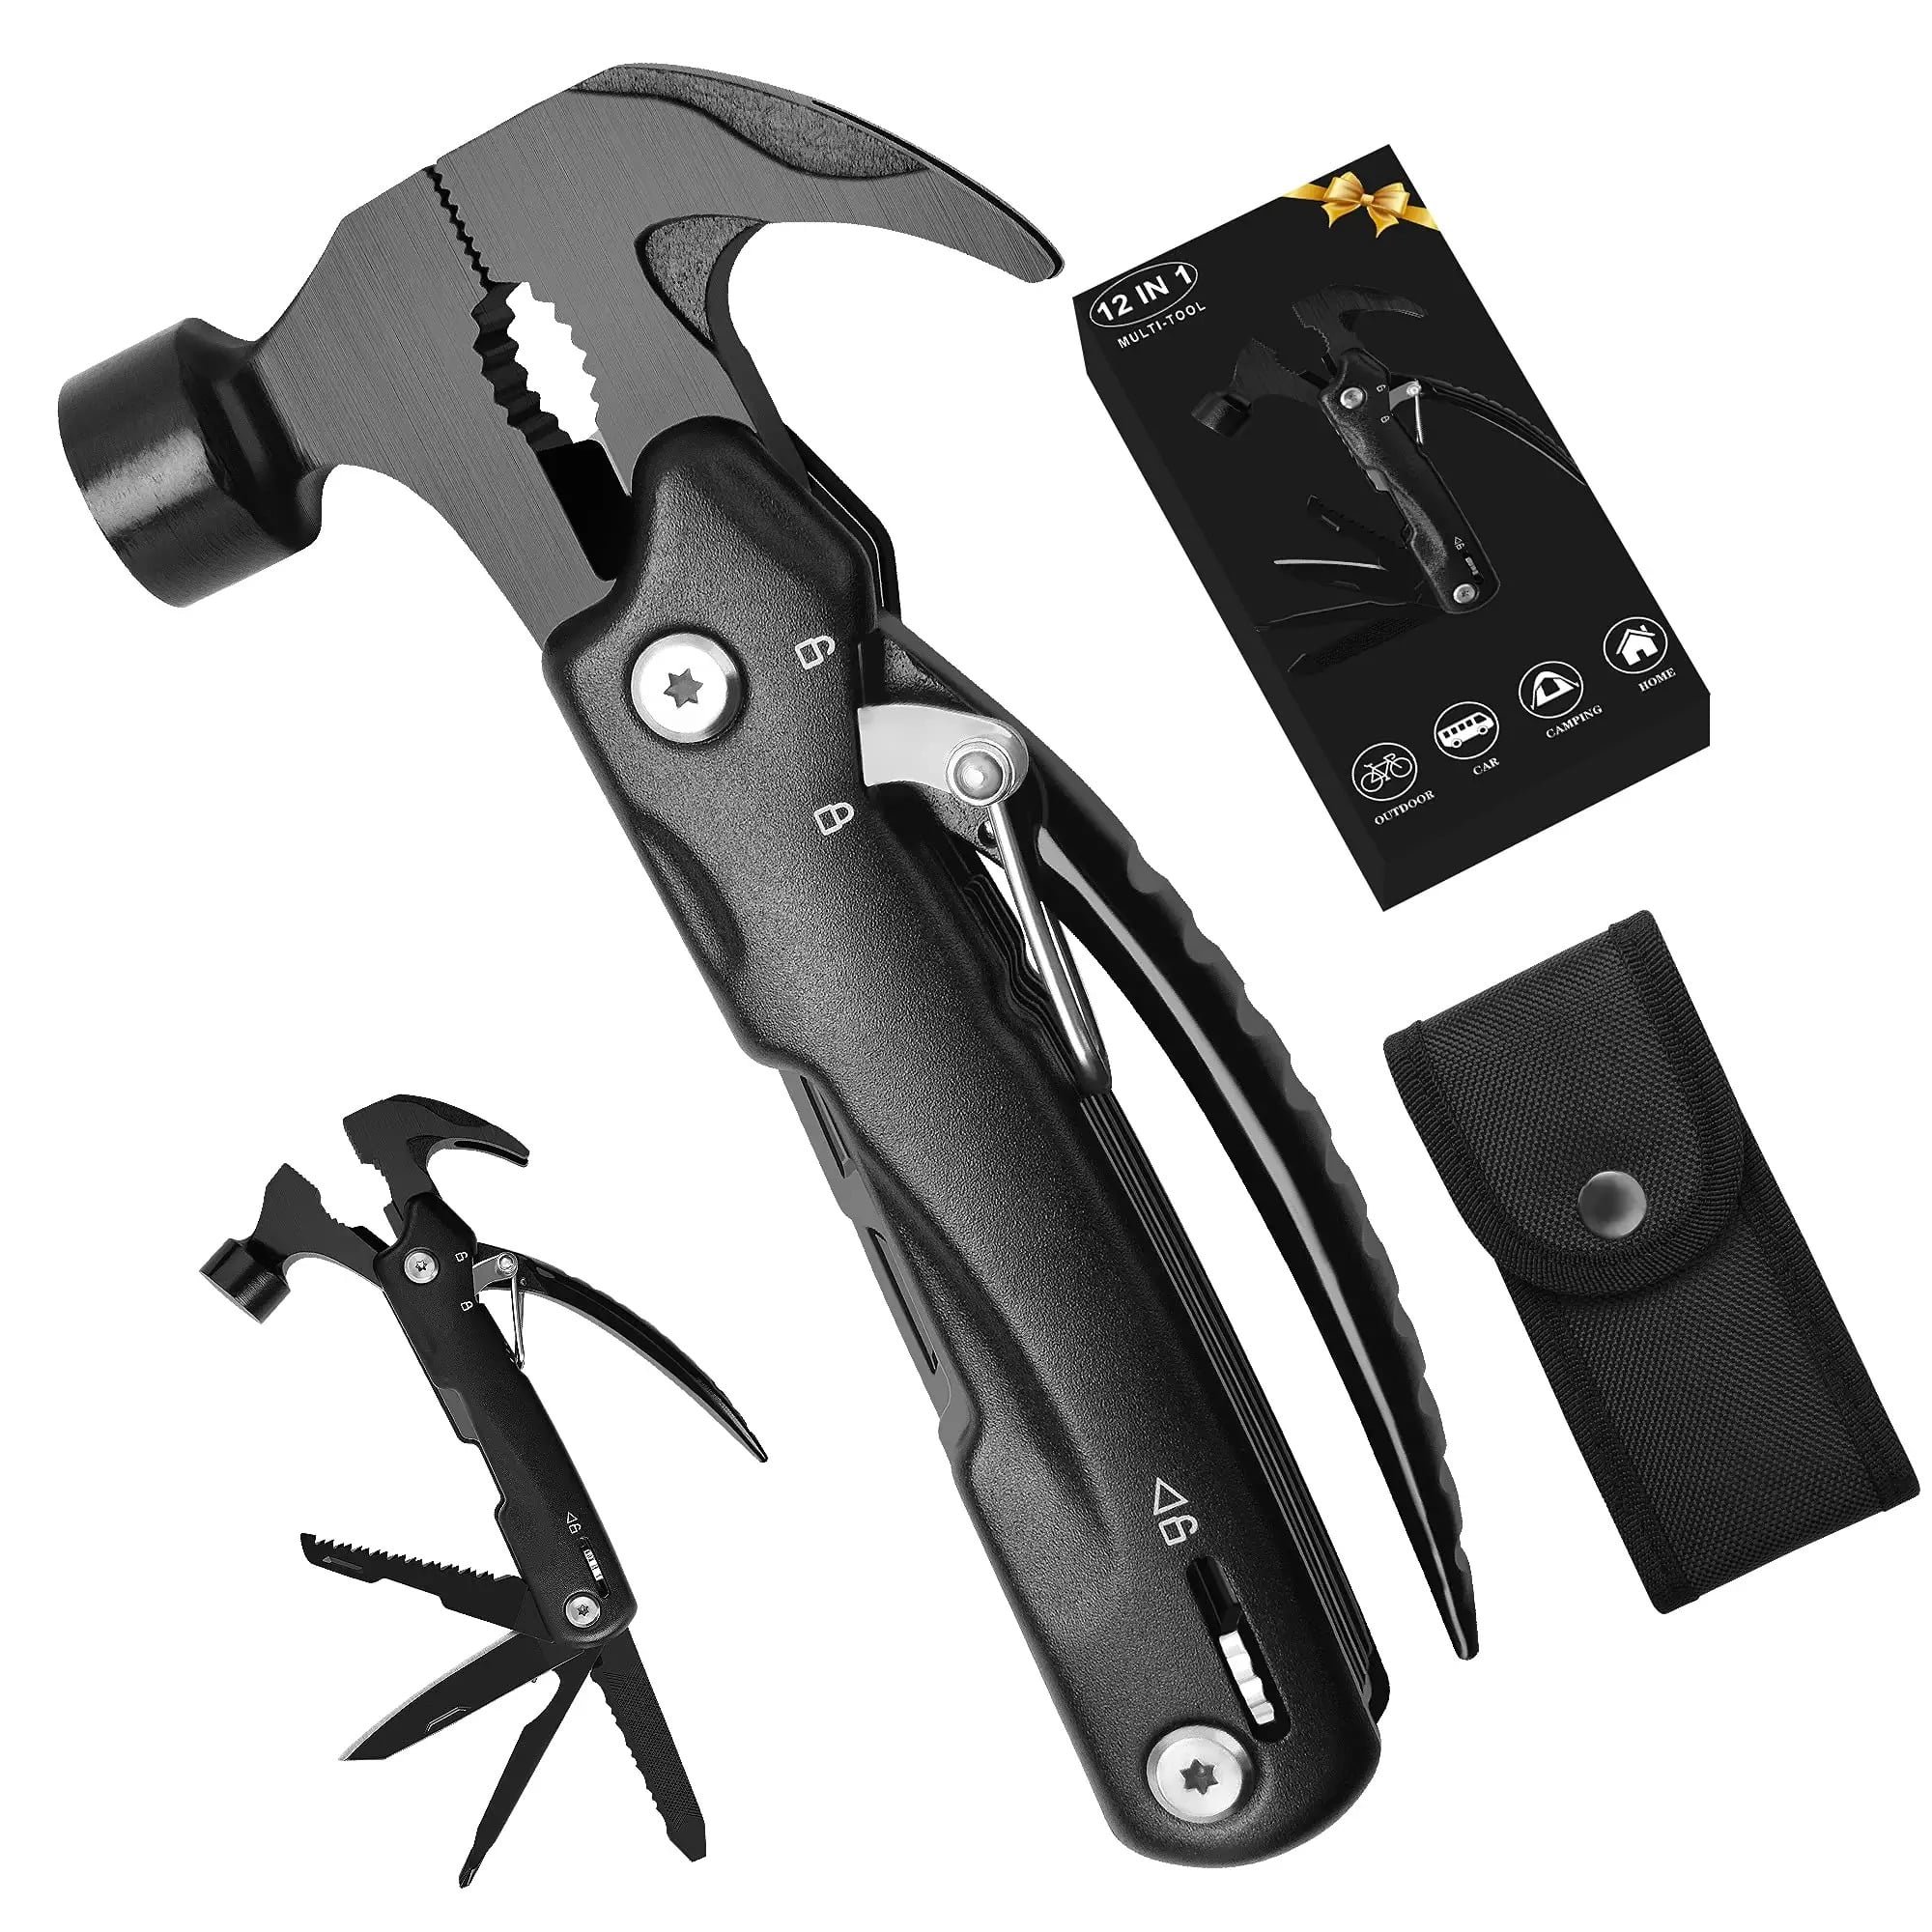 Tool,　Gifts　Multitool　Camping　Multitool　Men,　Camping　Christmas　Stuffers　Accessories,　Men/Dad/Husband/Him　Hammer　for　Cool　Gifts,　Stocking　Gear　Survival　(black)　Mens　Gadgets,　Perfect　for